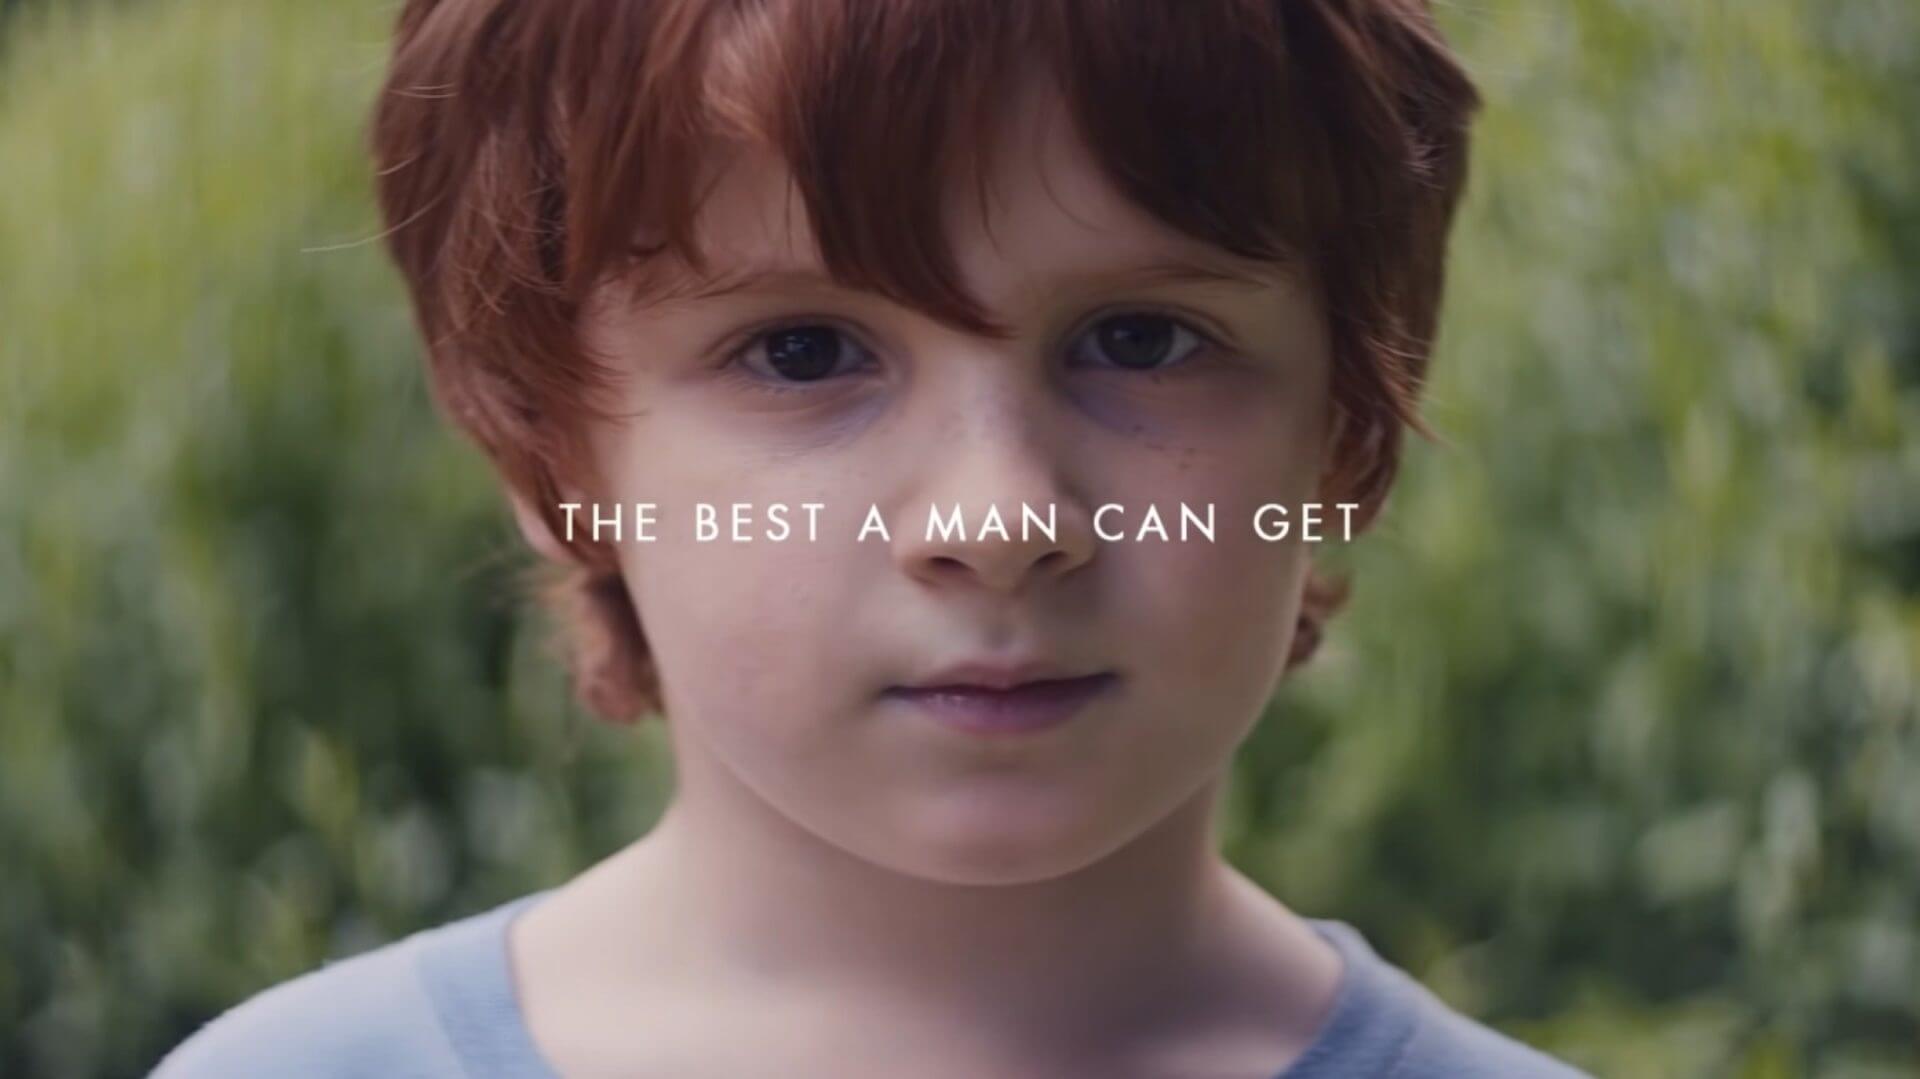 Taking A Renewed Look at Gillette’s “The Best Men Can Be” Campaign